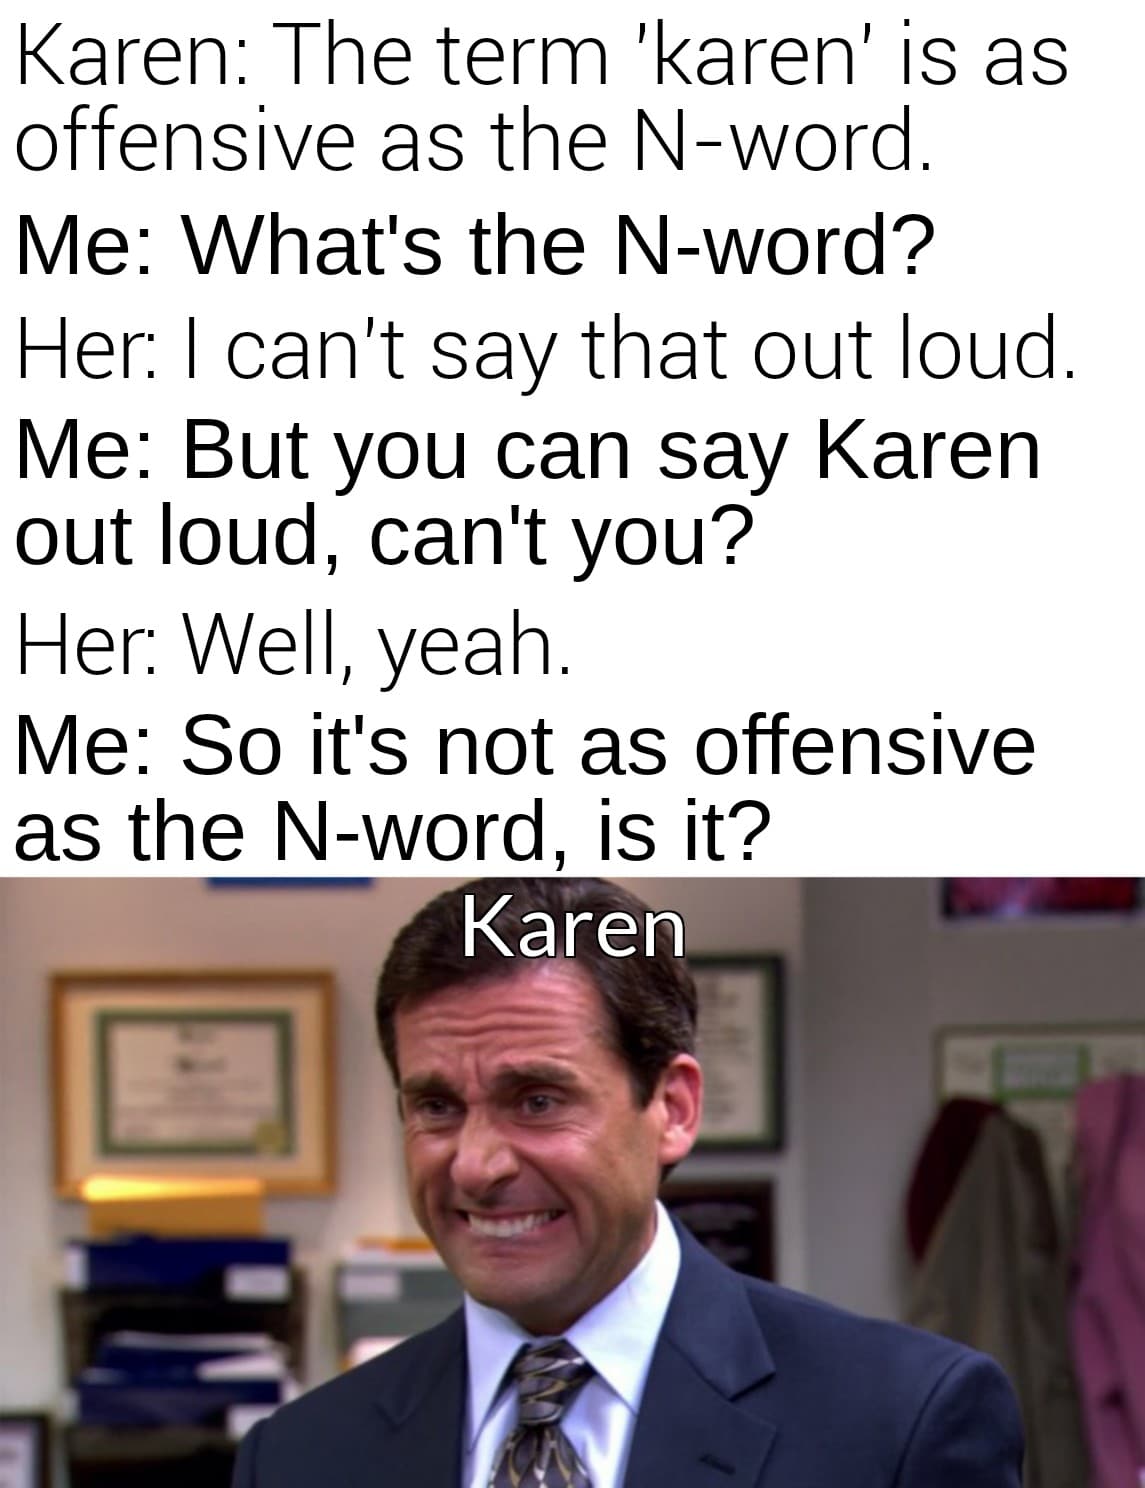 Funny, Karen, Karens, Mulaney, UnexpectedMulaney, John other memes Funny, Karen, Karens, Mulaney, UnexpectedMulaney, John text: Karen: The term 'karen' is as offensive as the N-word. Me: What's the N-word? Her: I can't say that out loud. Me: But you can say Karen out loud, can't you? Her: Well, yeah. Me: So it's not as offensive as the N-word, is it? Karen 1 